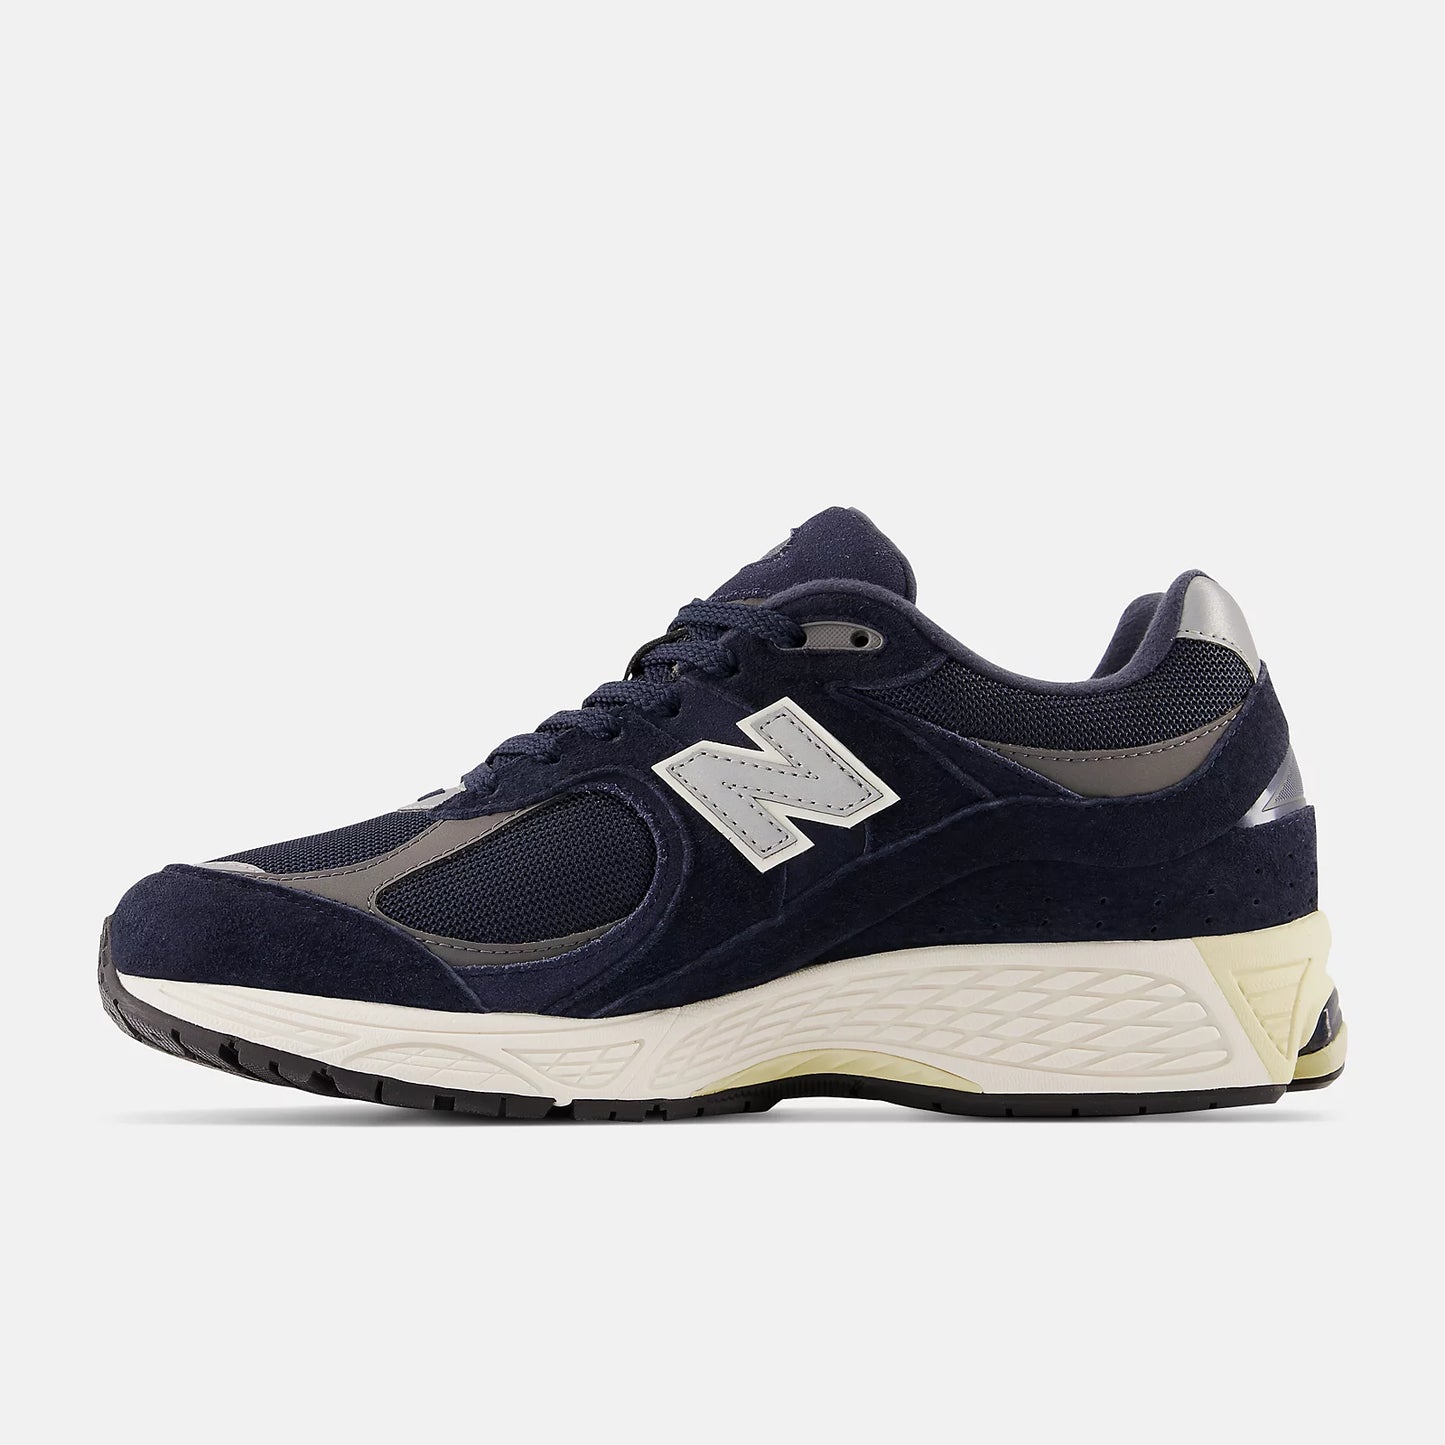 NEW BALANCE M2002RCA - Eclipse with castlerock and silver metallic